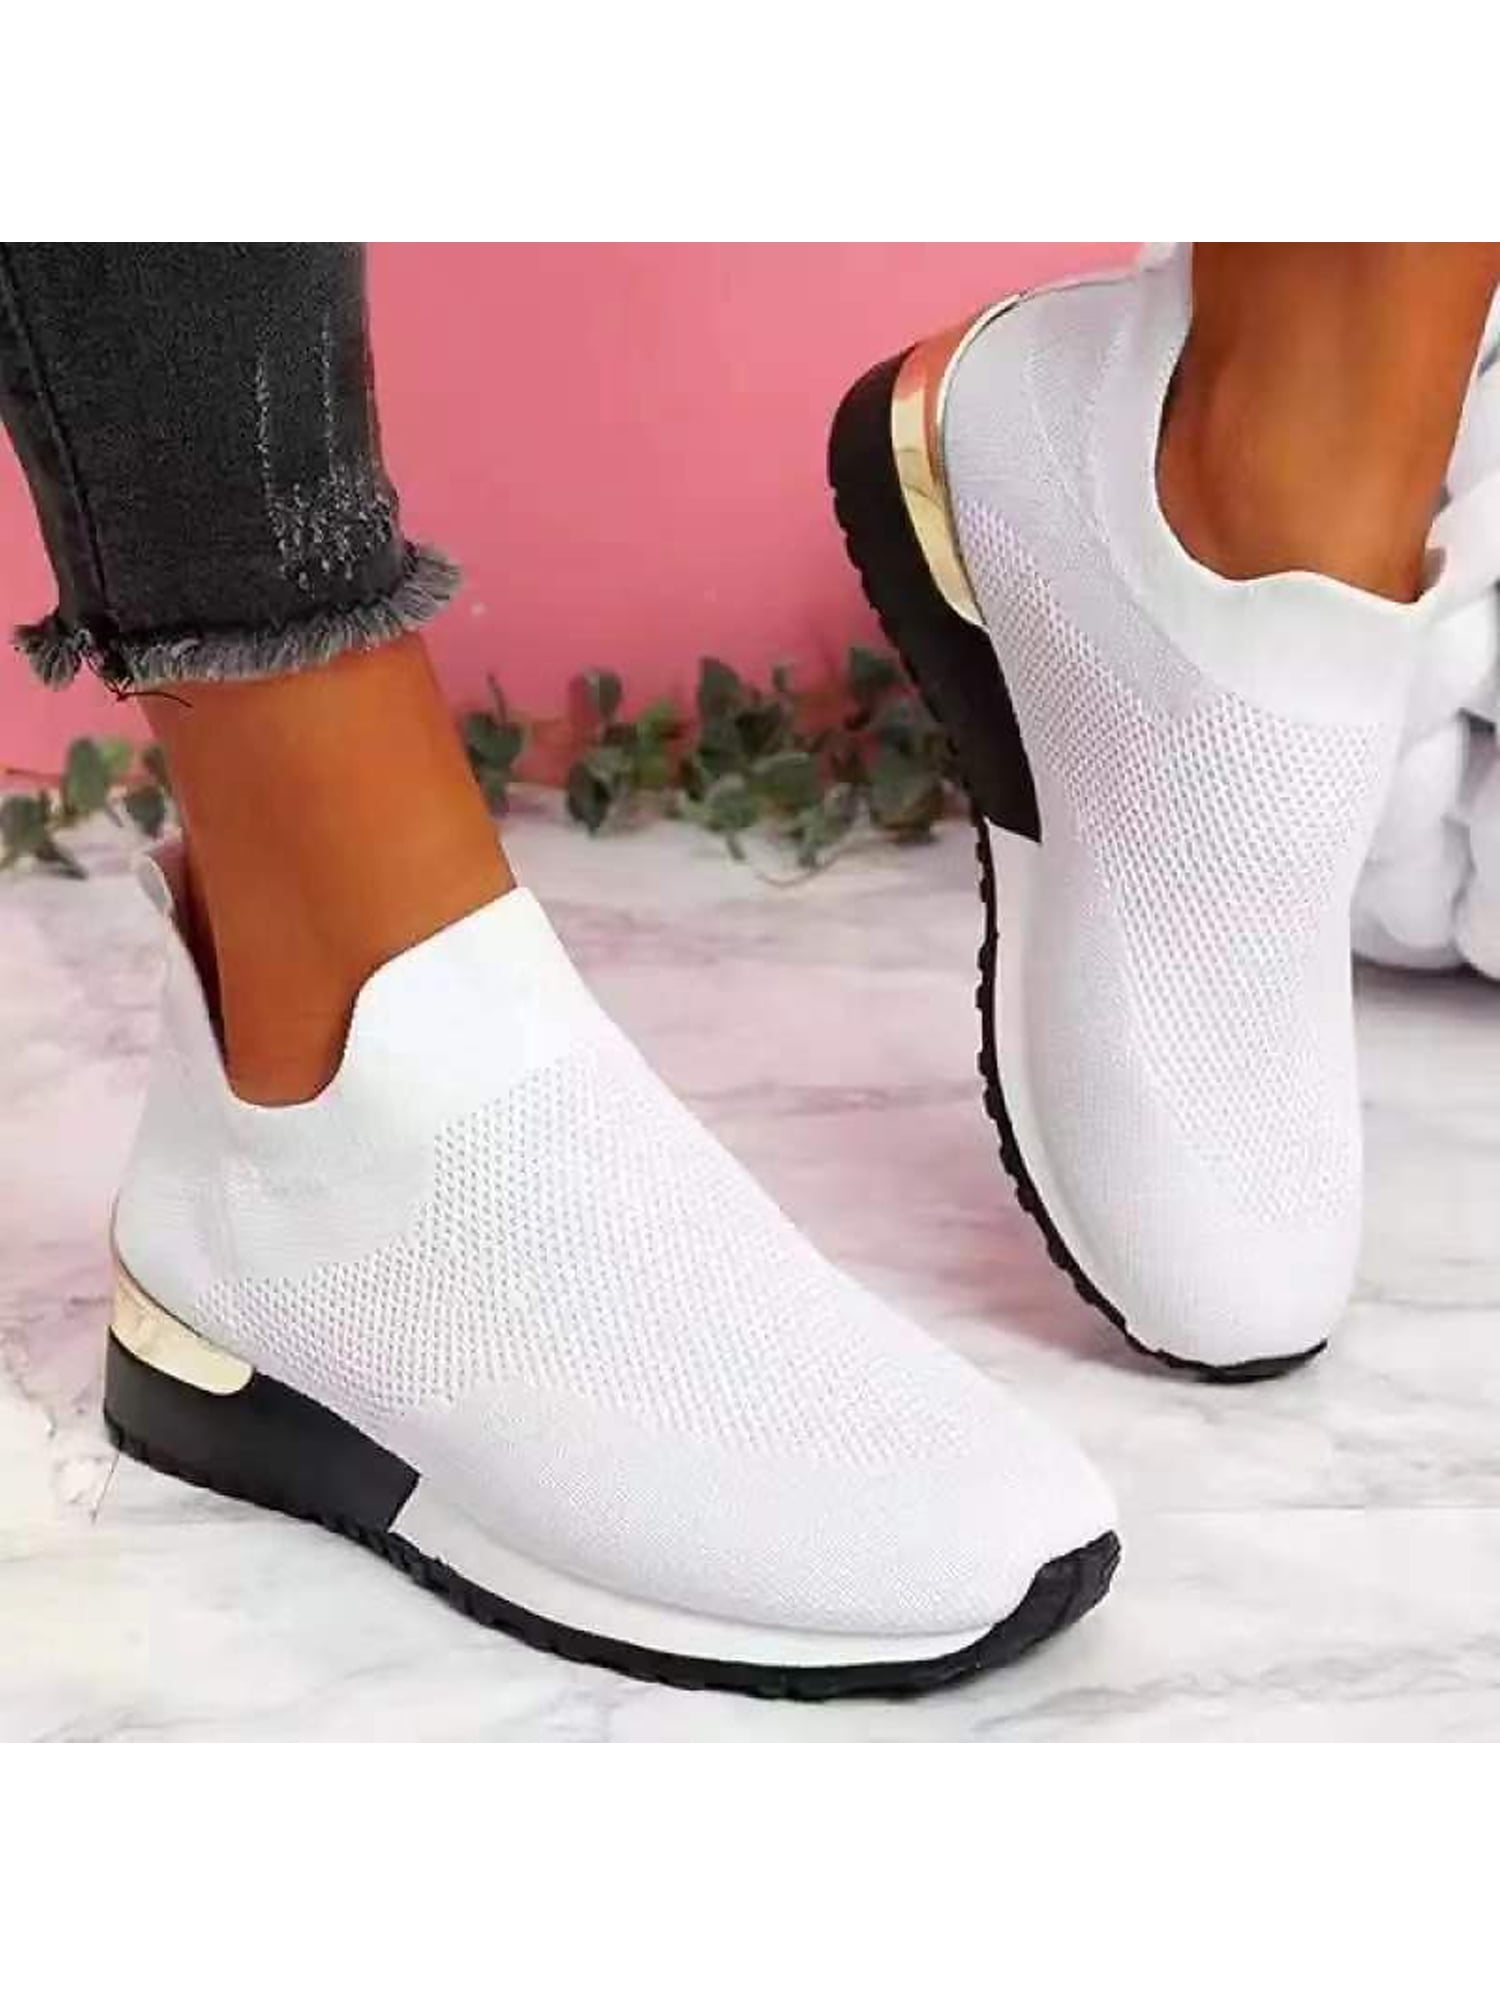 Women Flats Sneakers Slip On Sock Sport Shoes Breathable Sneakers Casual Comfort 